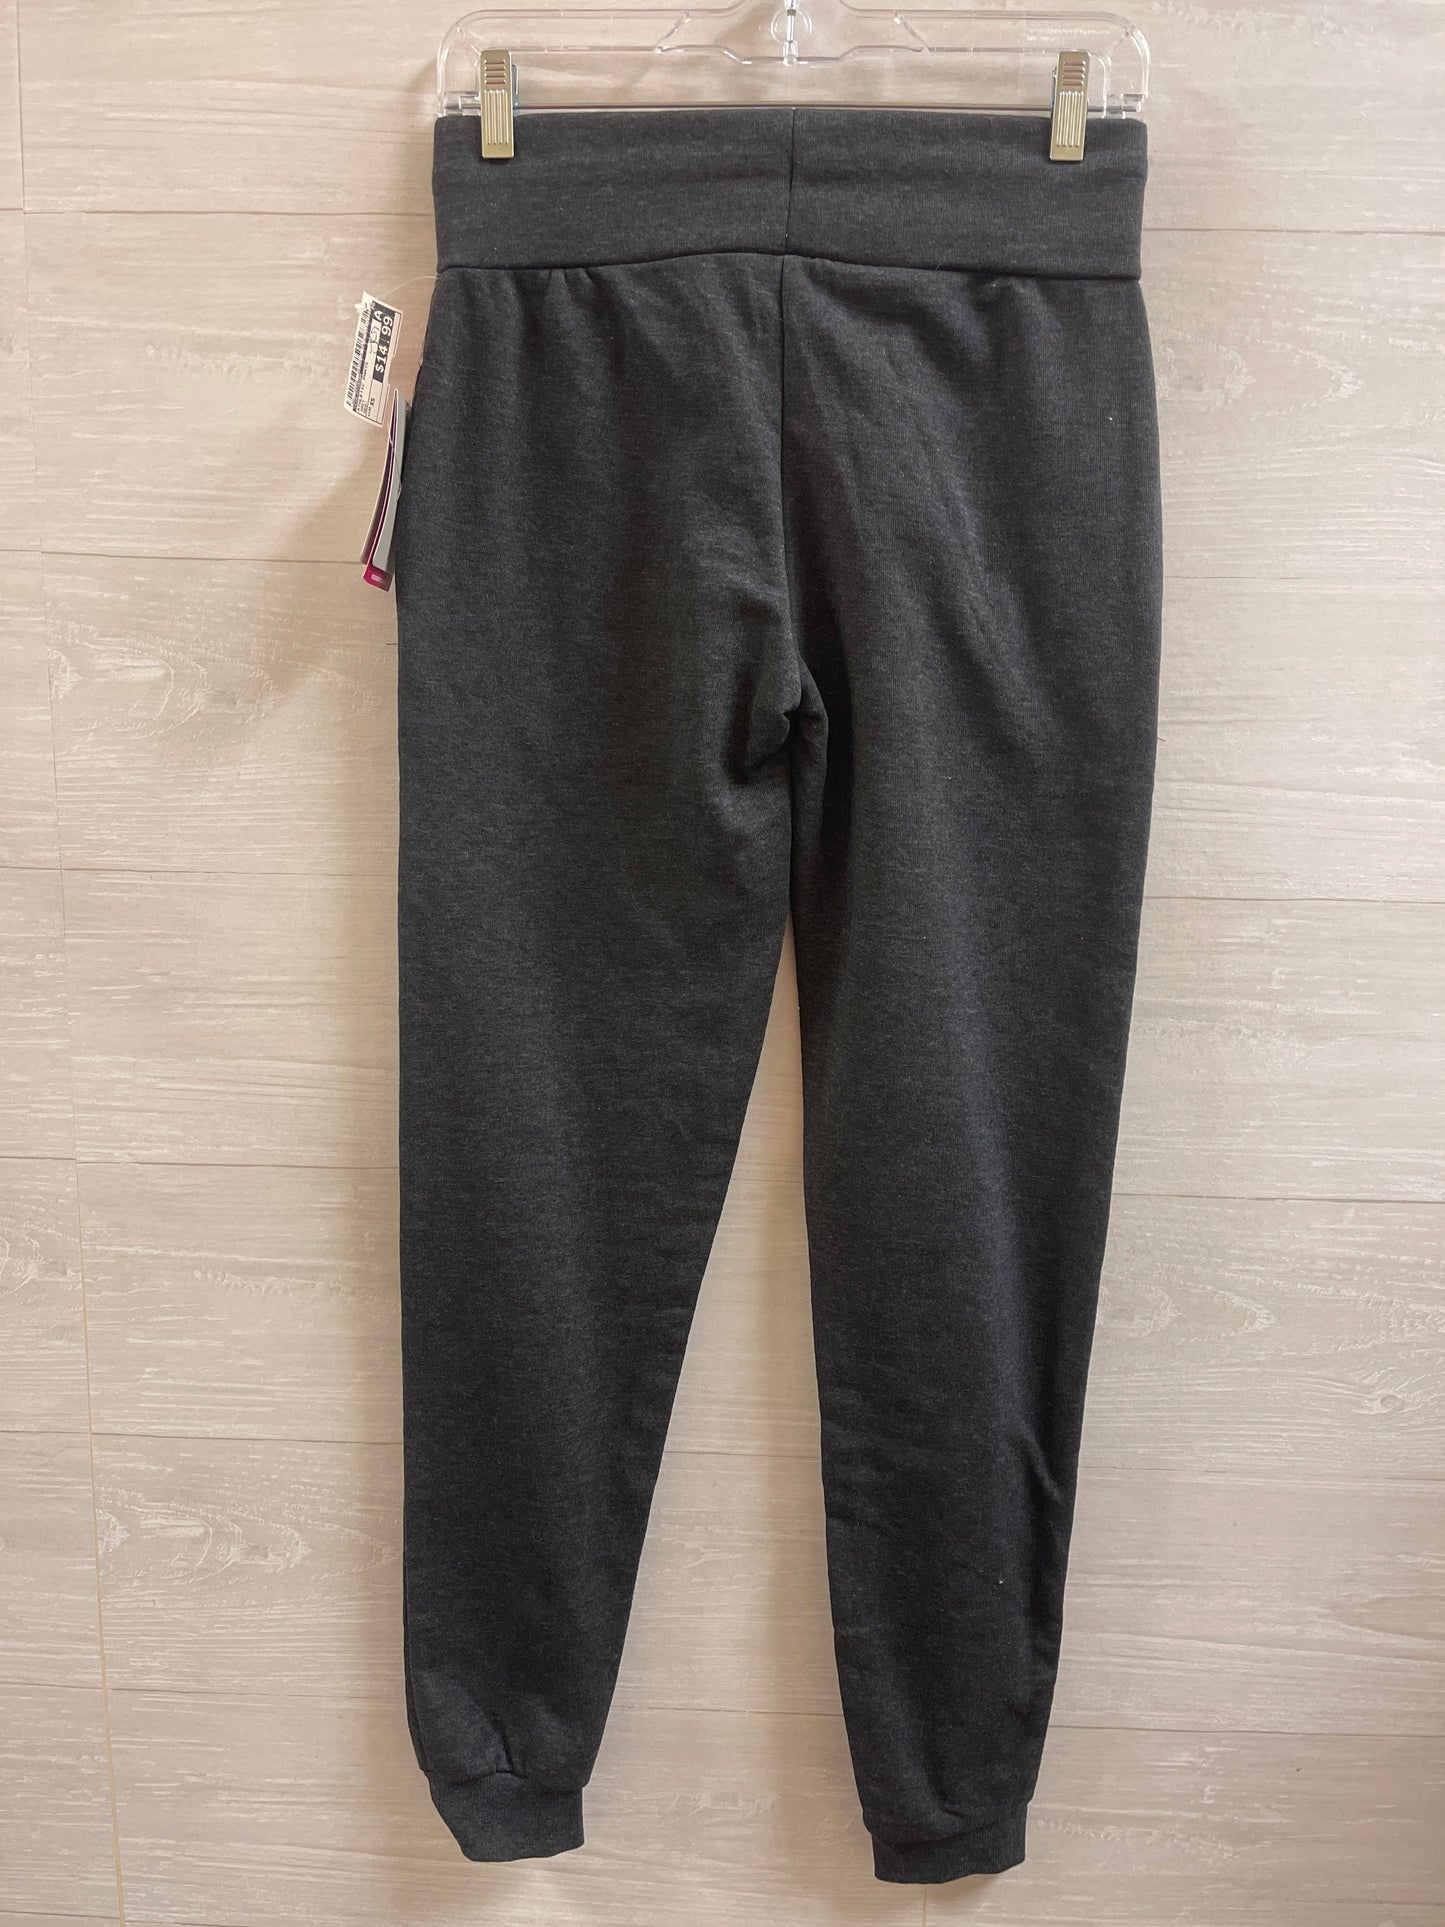 Athletic Pants By Colosseum  Size: Xs